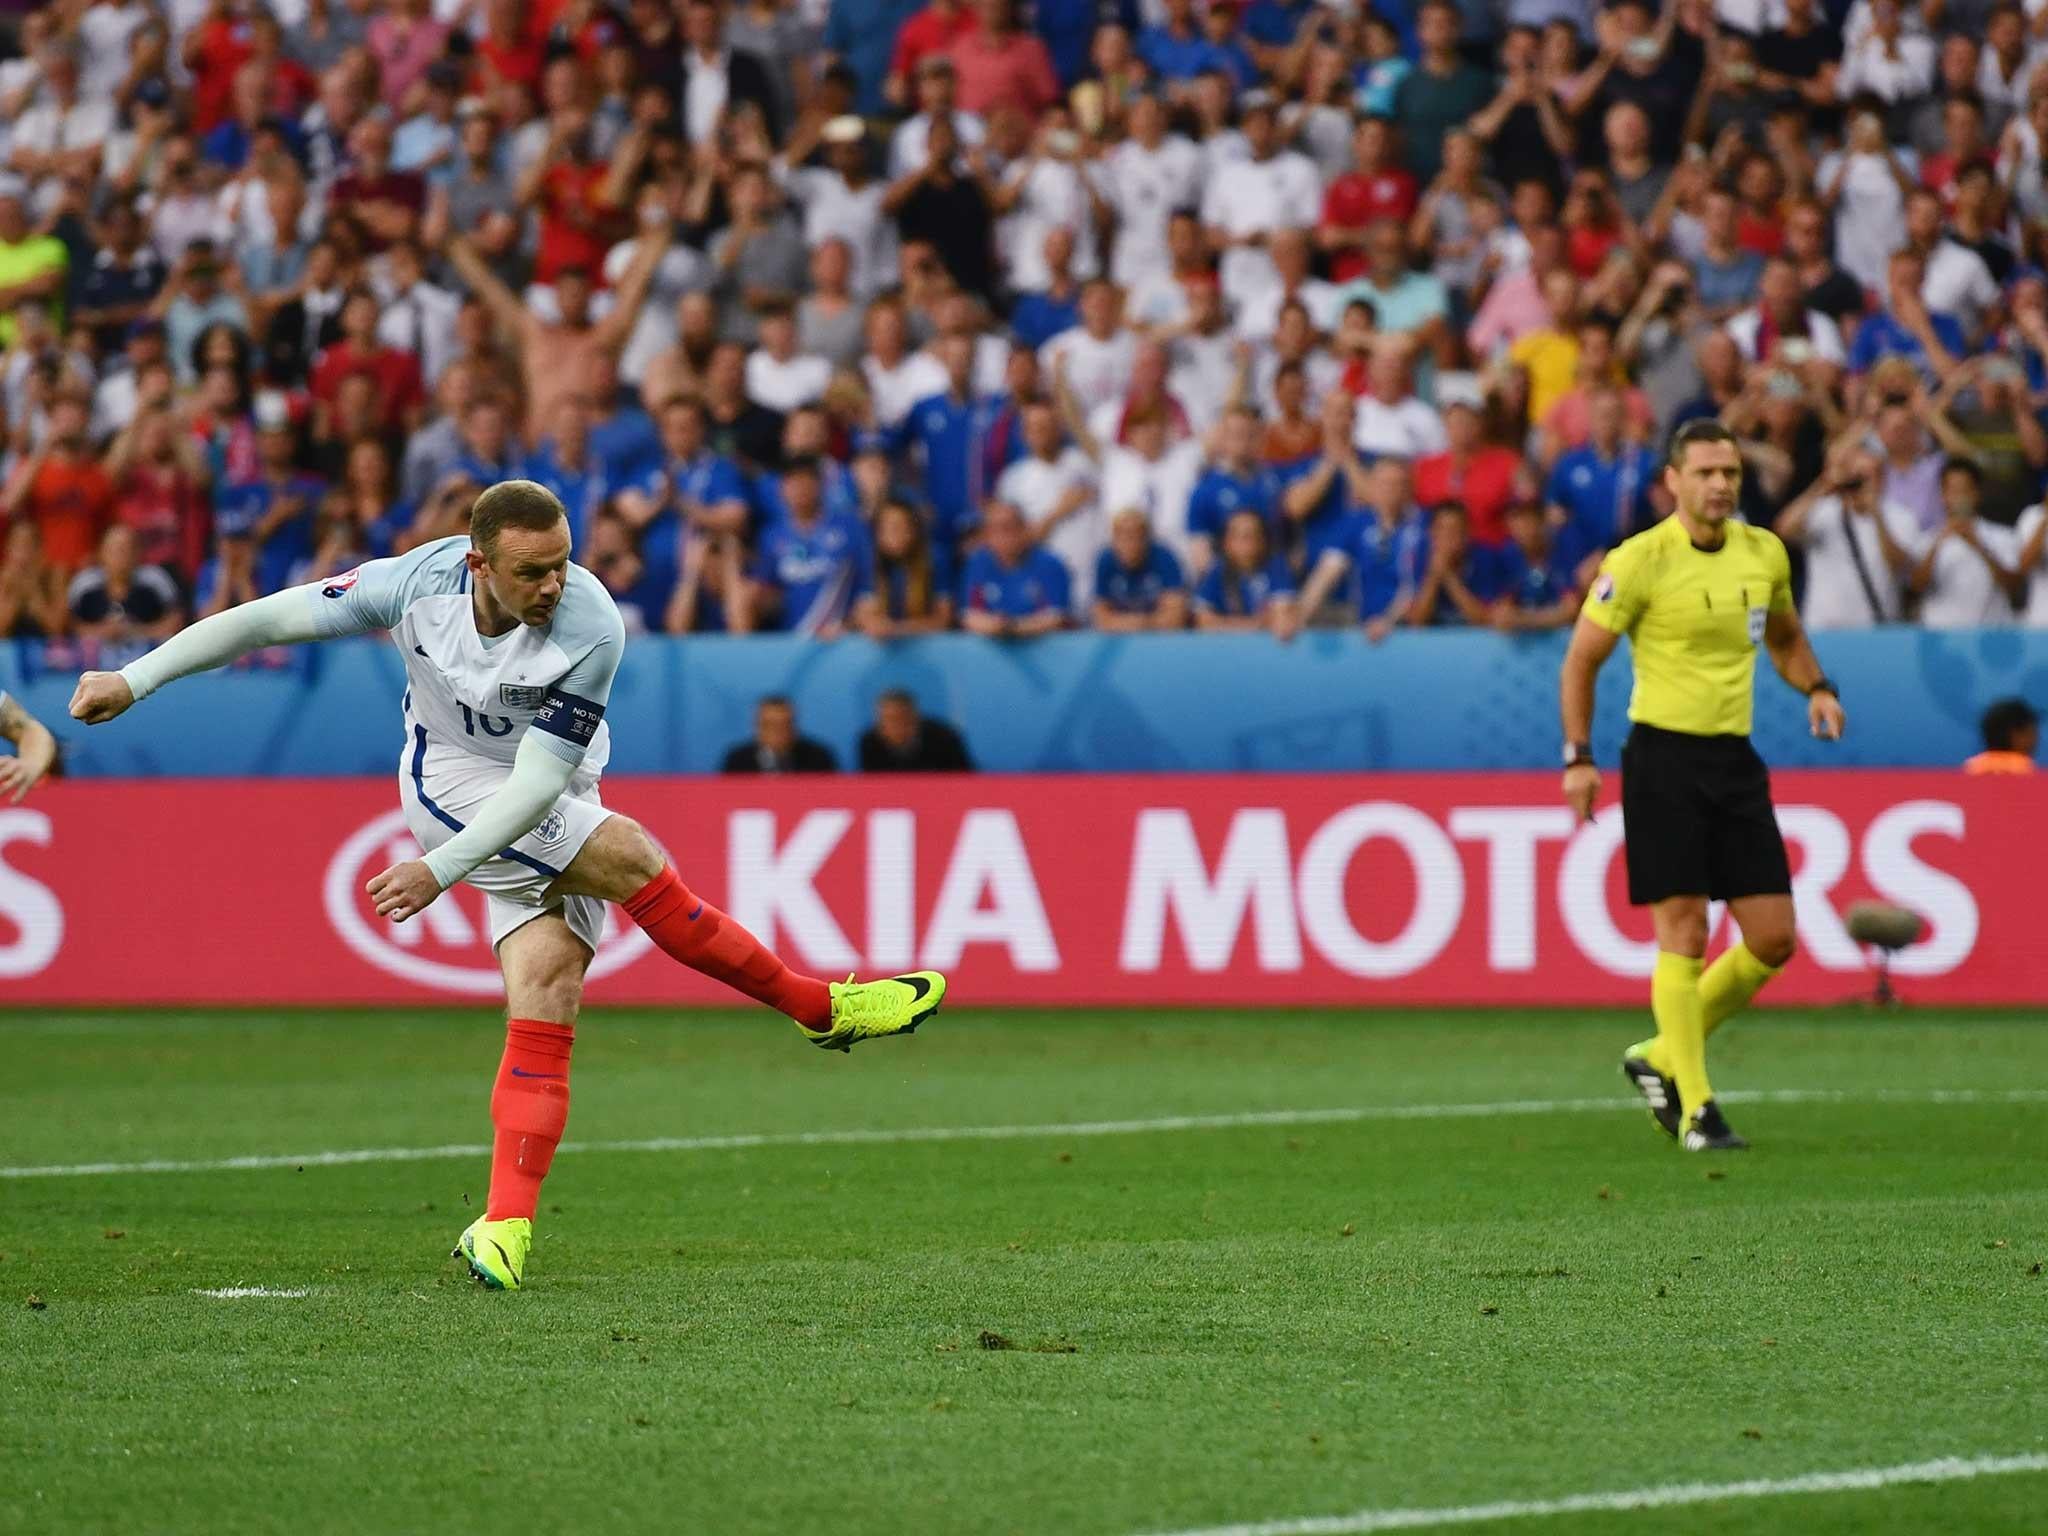 Rooney's penalty gave England an early lead